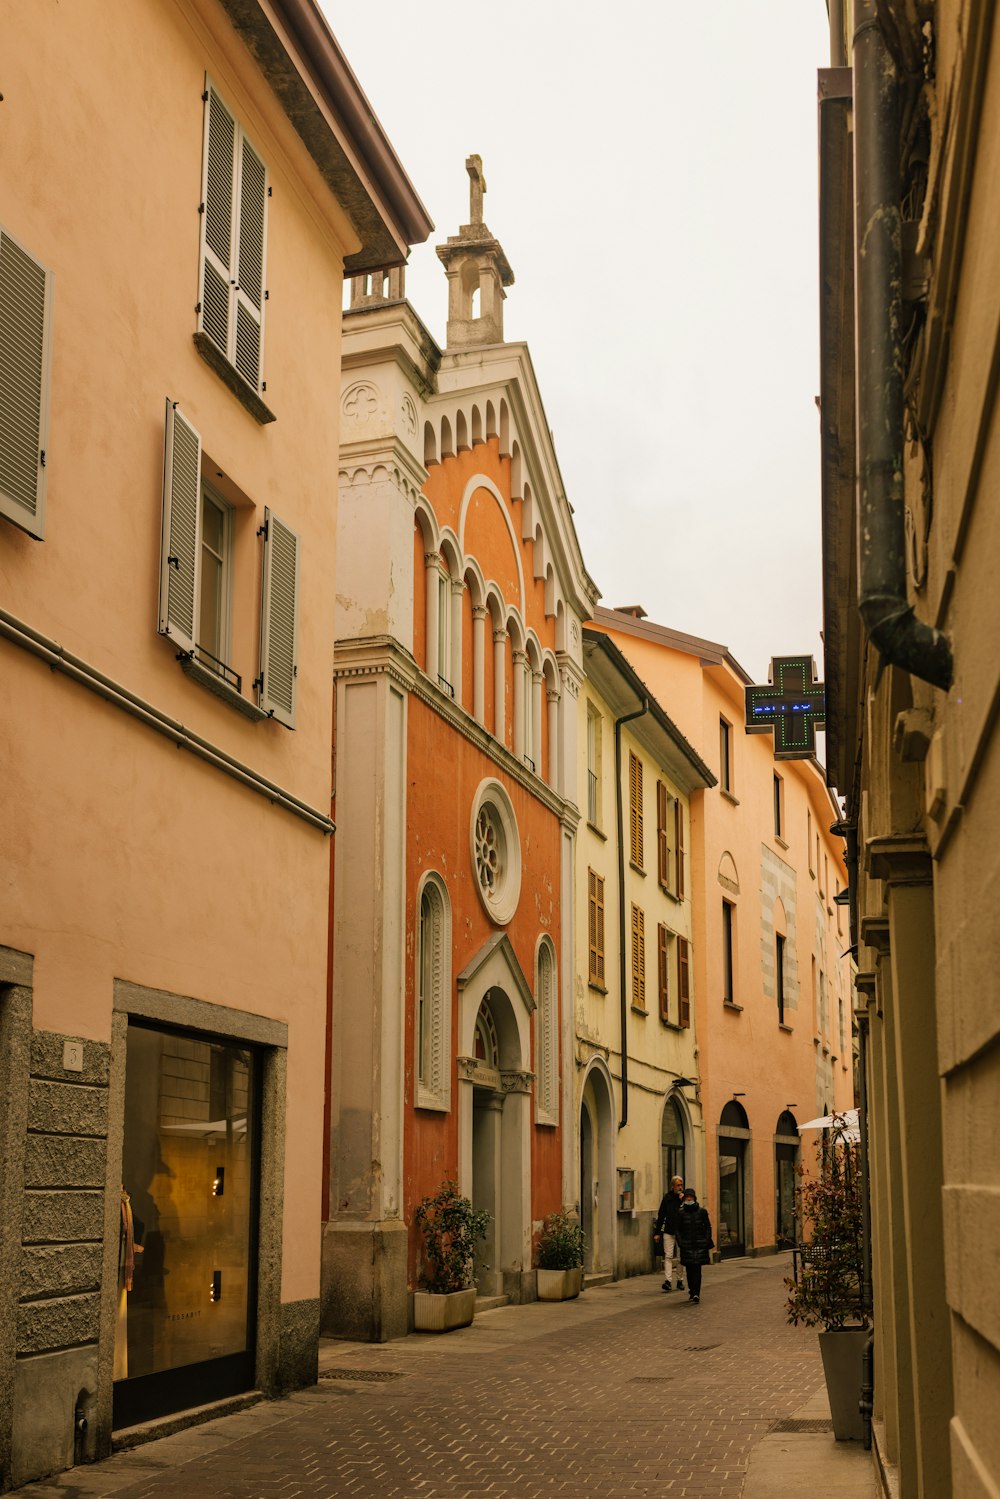 a cobblestone street lined with buildings and a clock tower